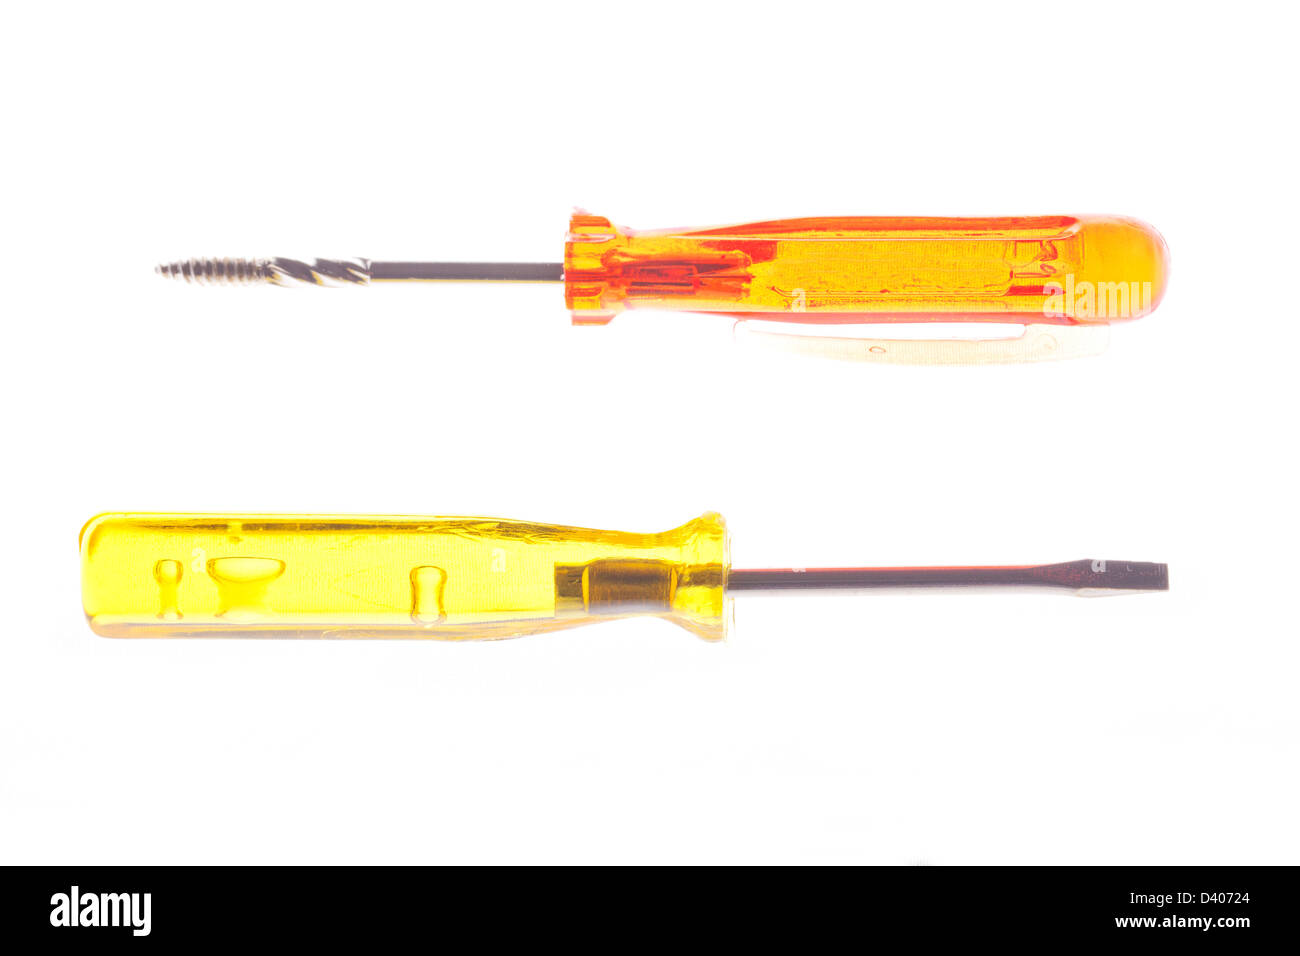 A couple of colorful screwdrivers over white Stock Photo